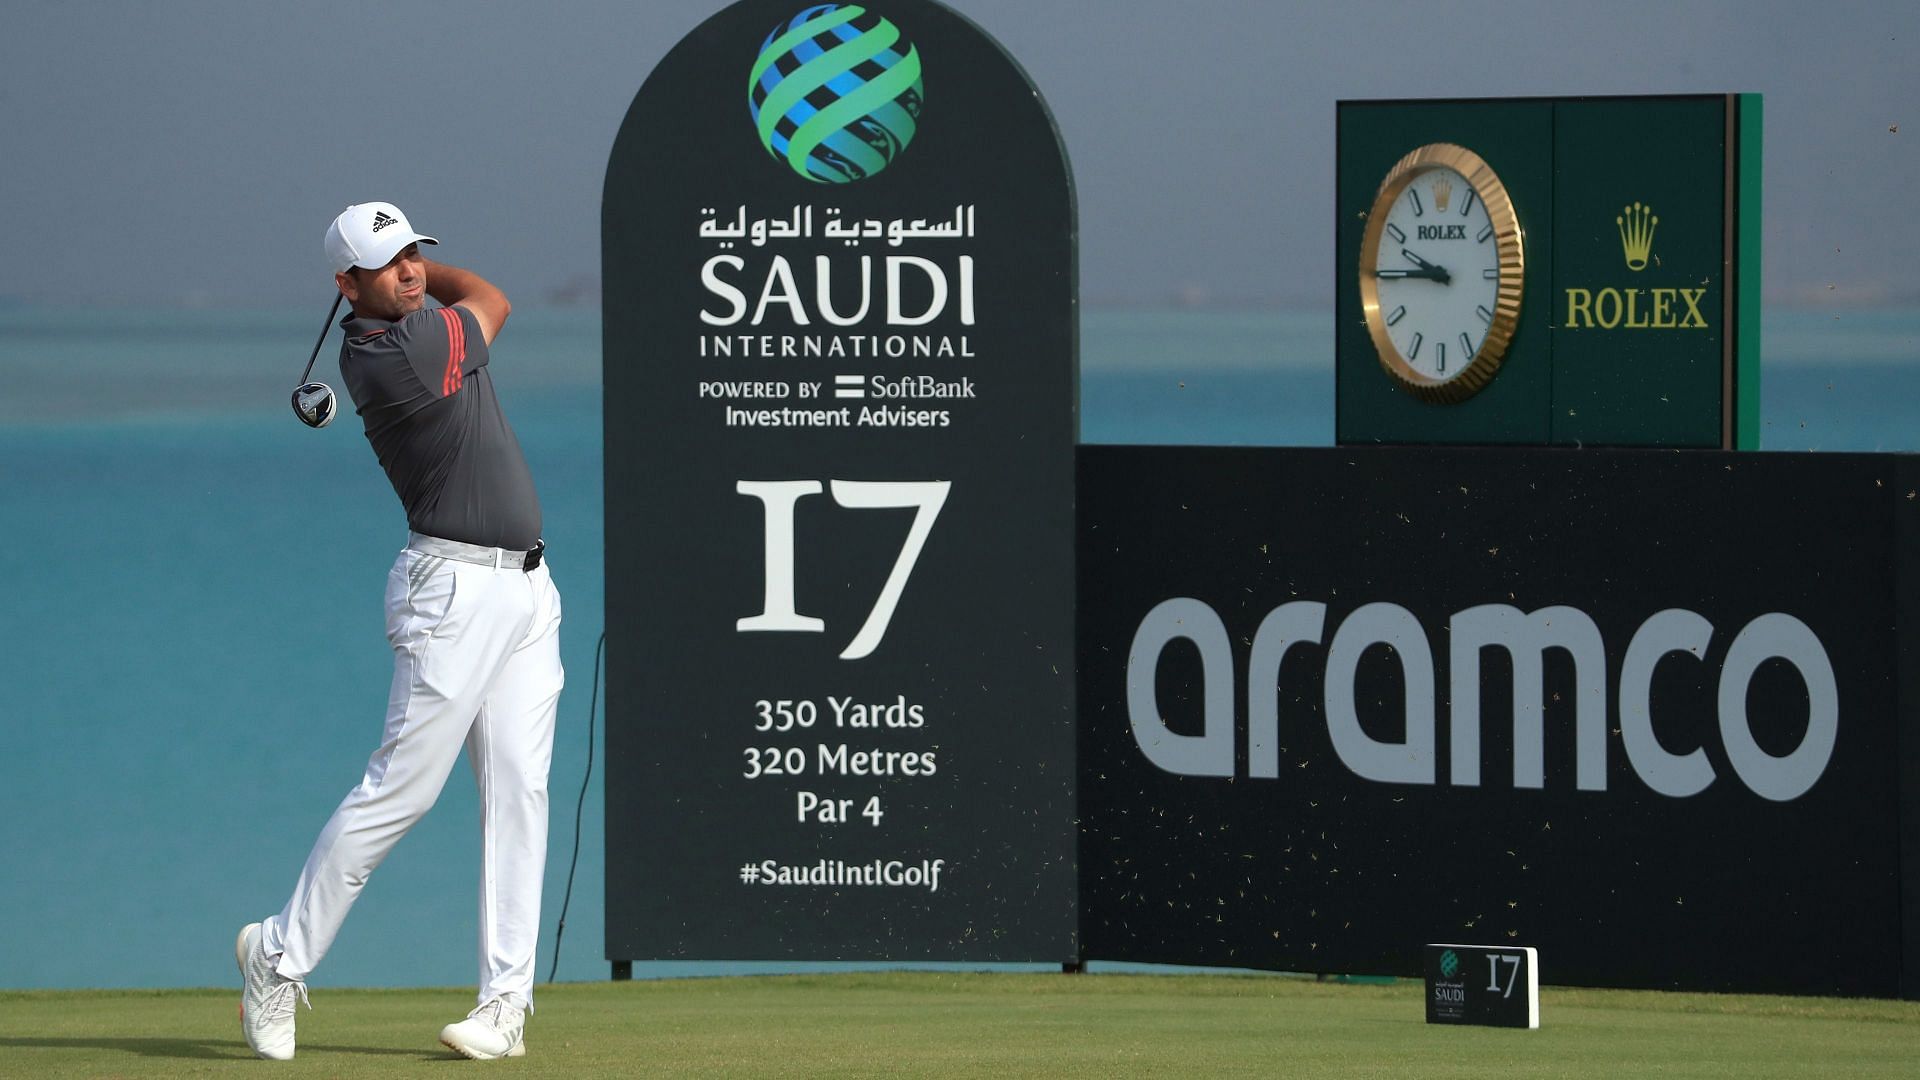 When and where to watch the PIF Saudi International?